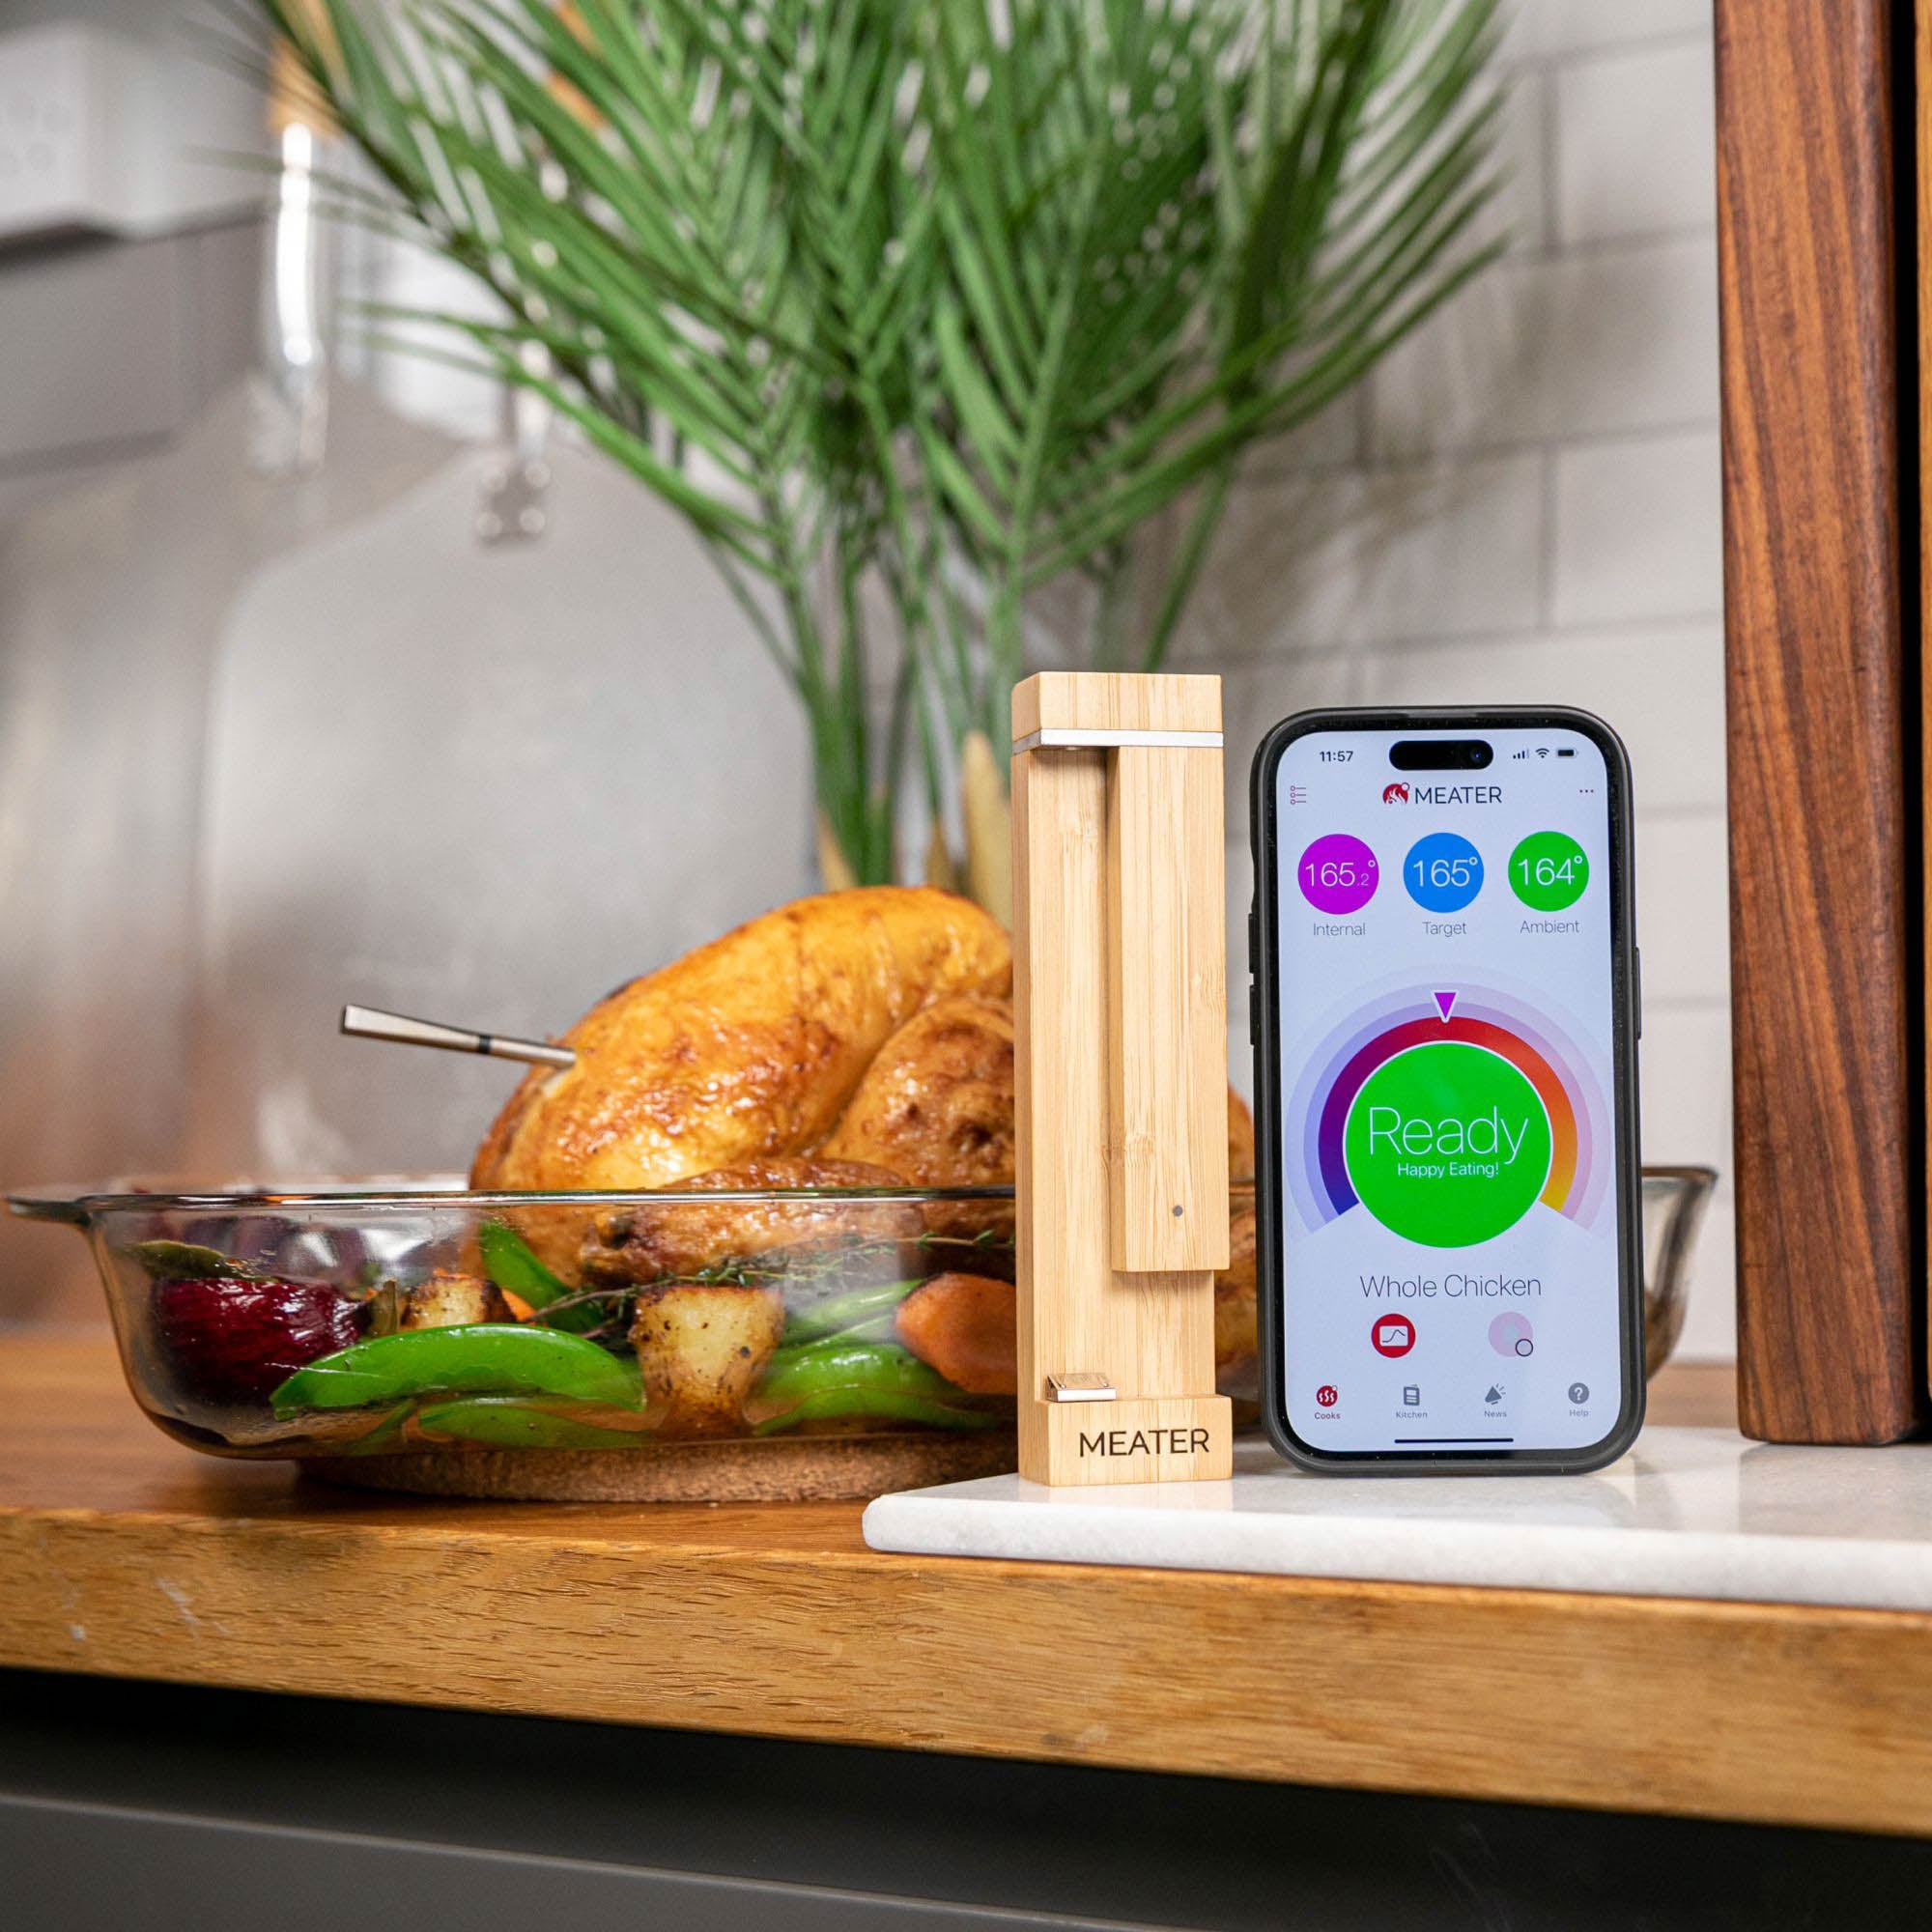 Meater 2 Plus Smart Meat Thermometer 